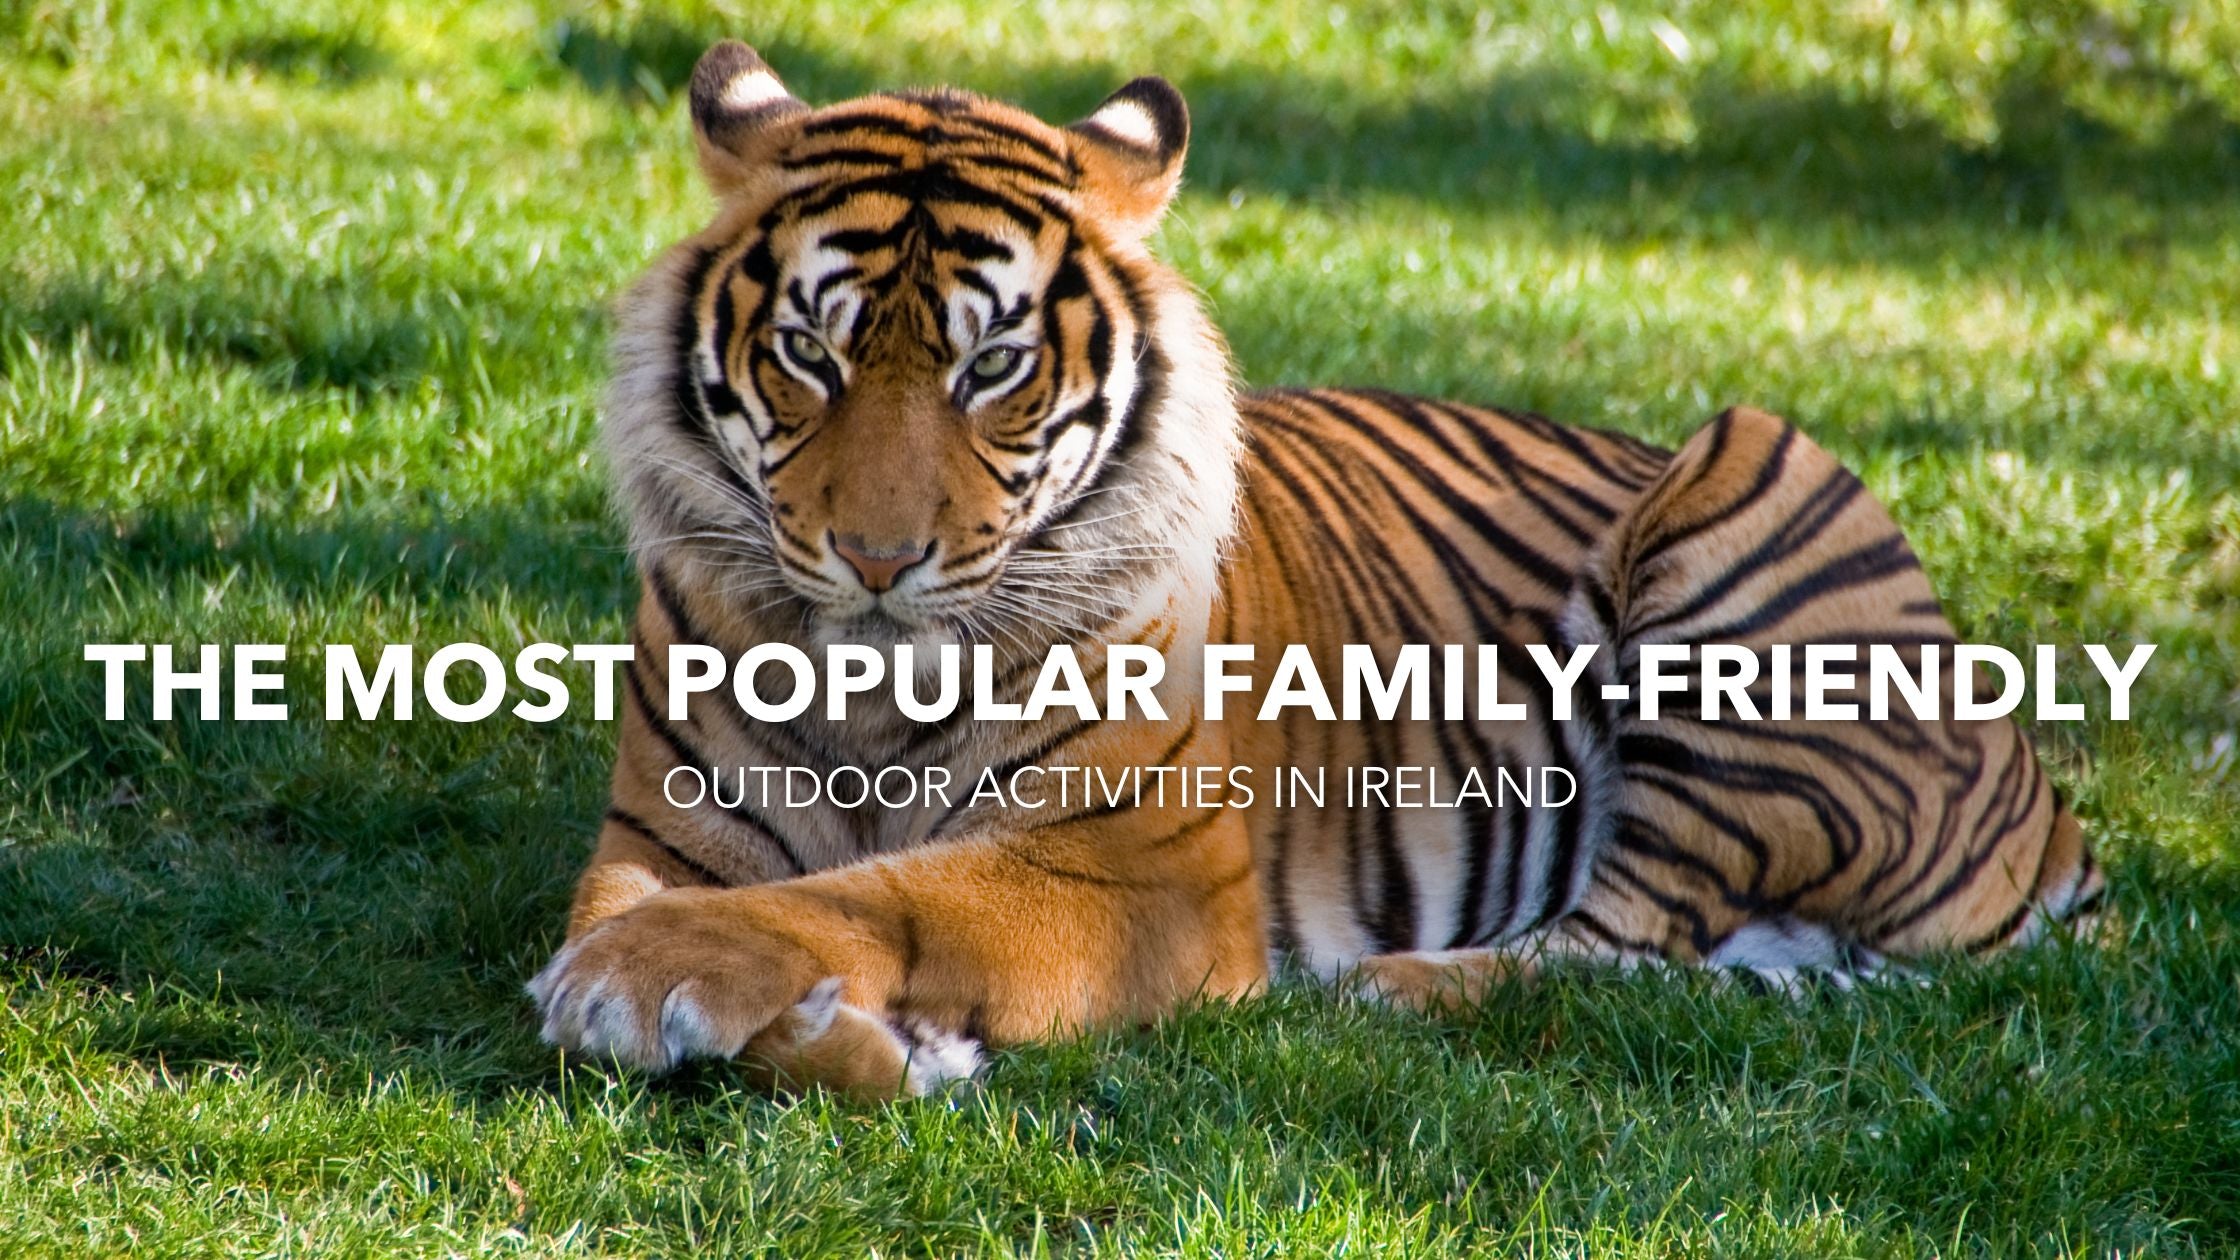 The Most Popular Family-Friendly Outdoor Activities in Ireland